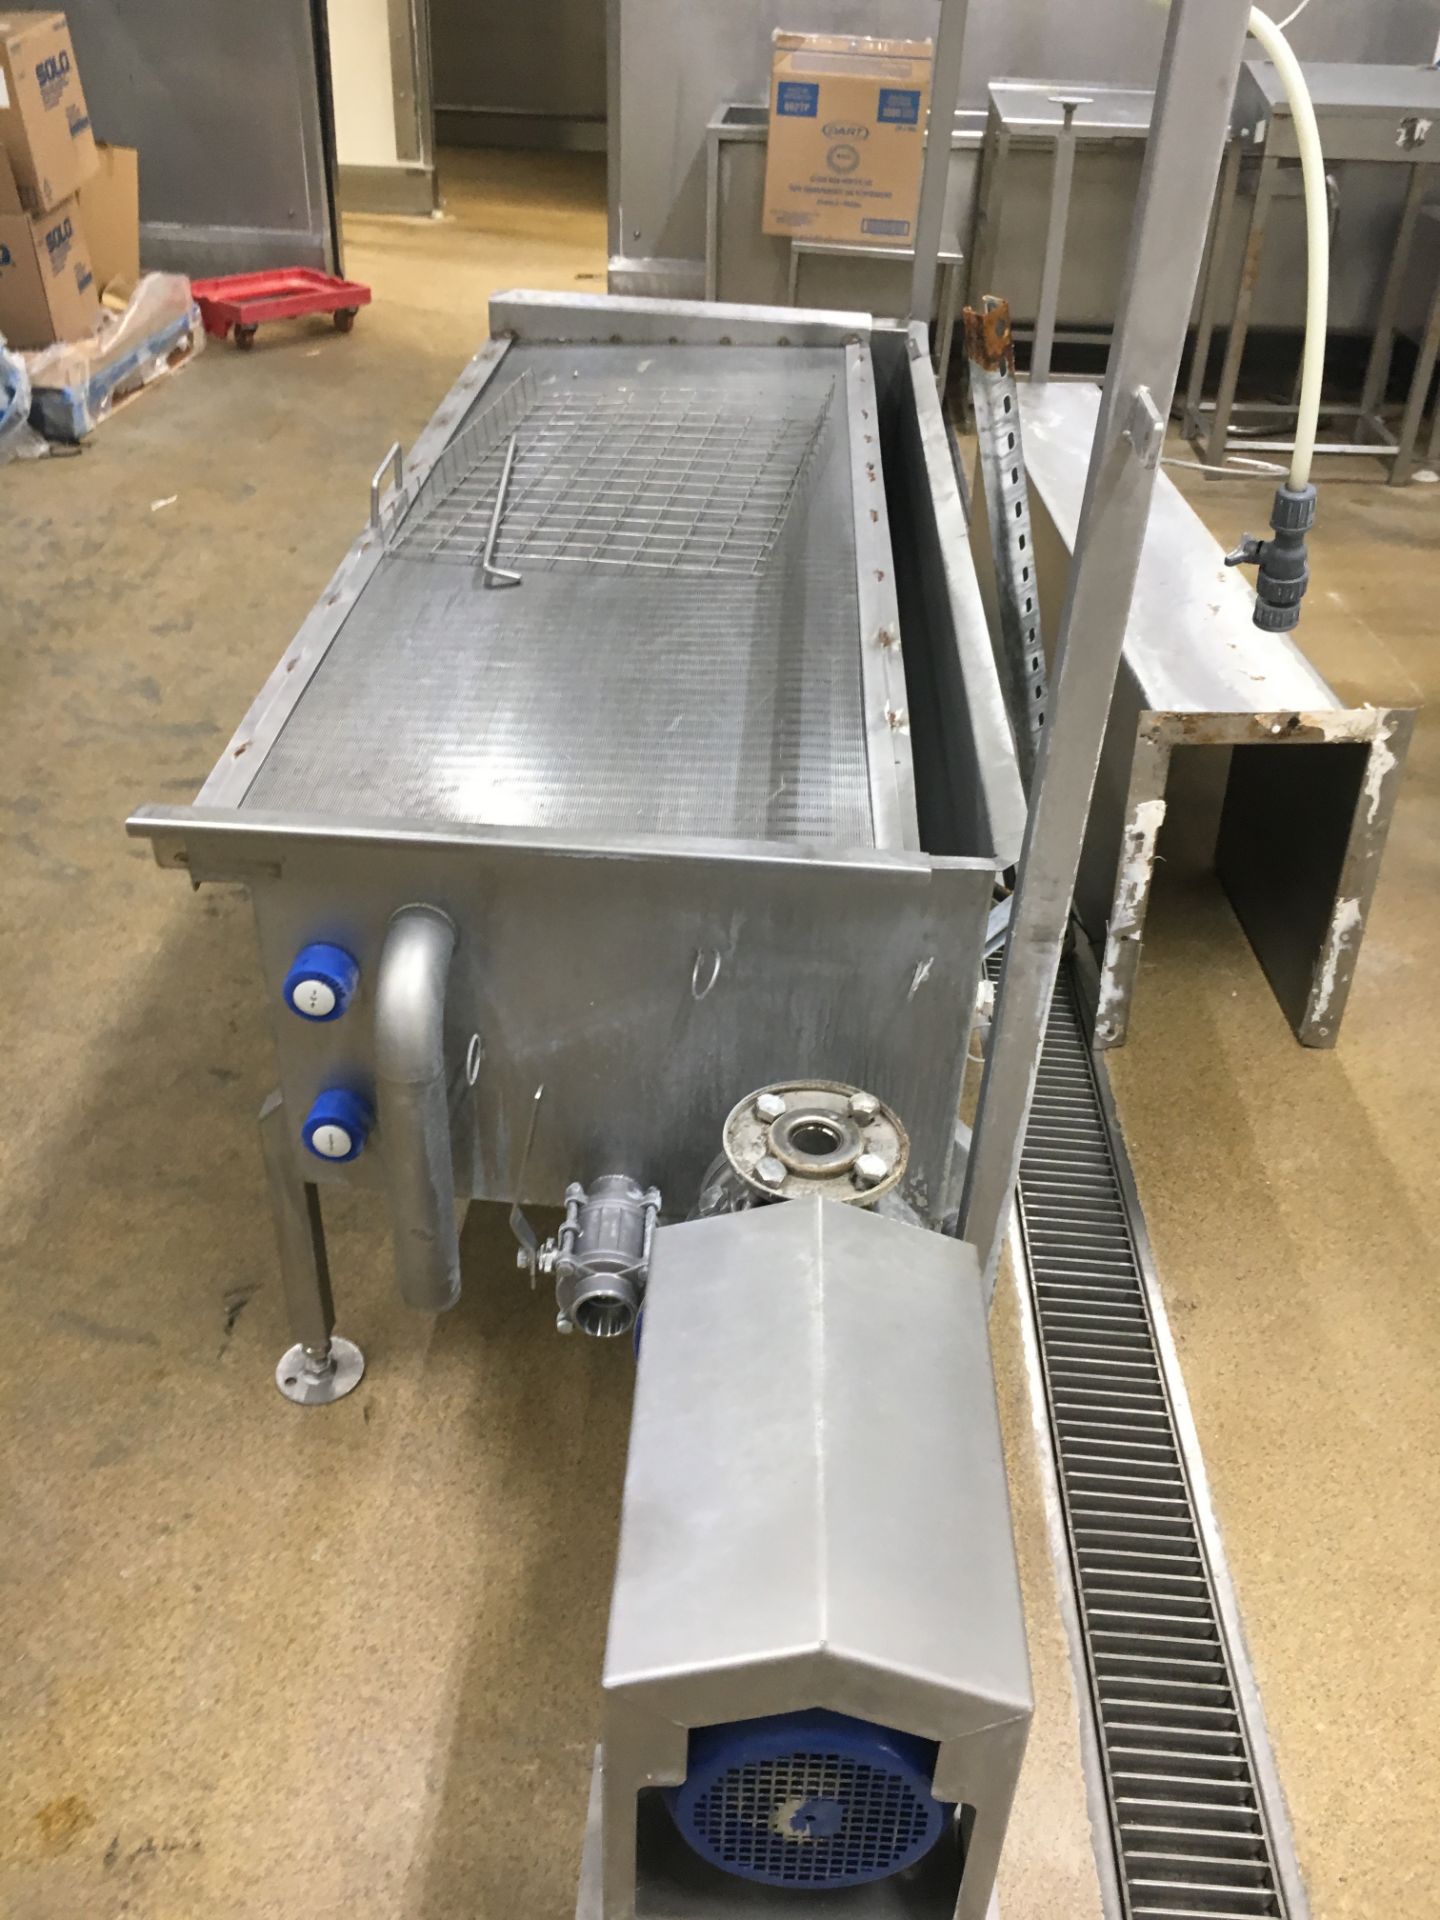 Pineapple or Mango washing flume with spring exit conveyor for soft landing. LO £200 - Image 4 of 4